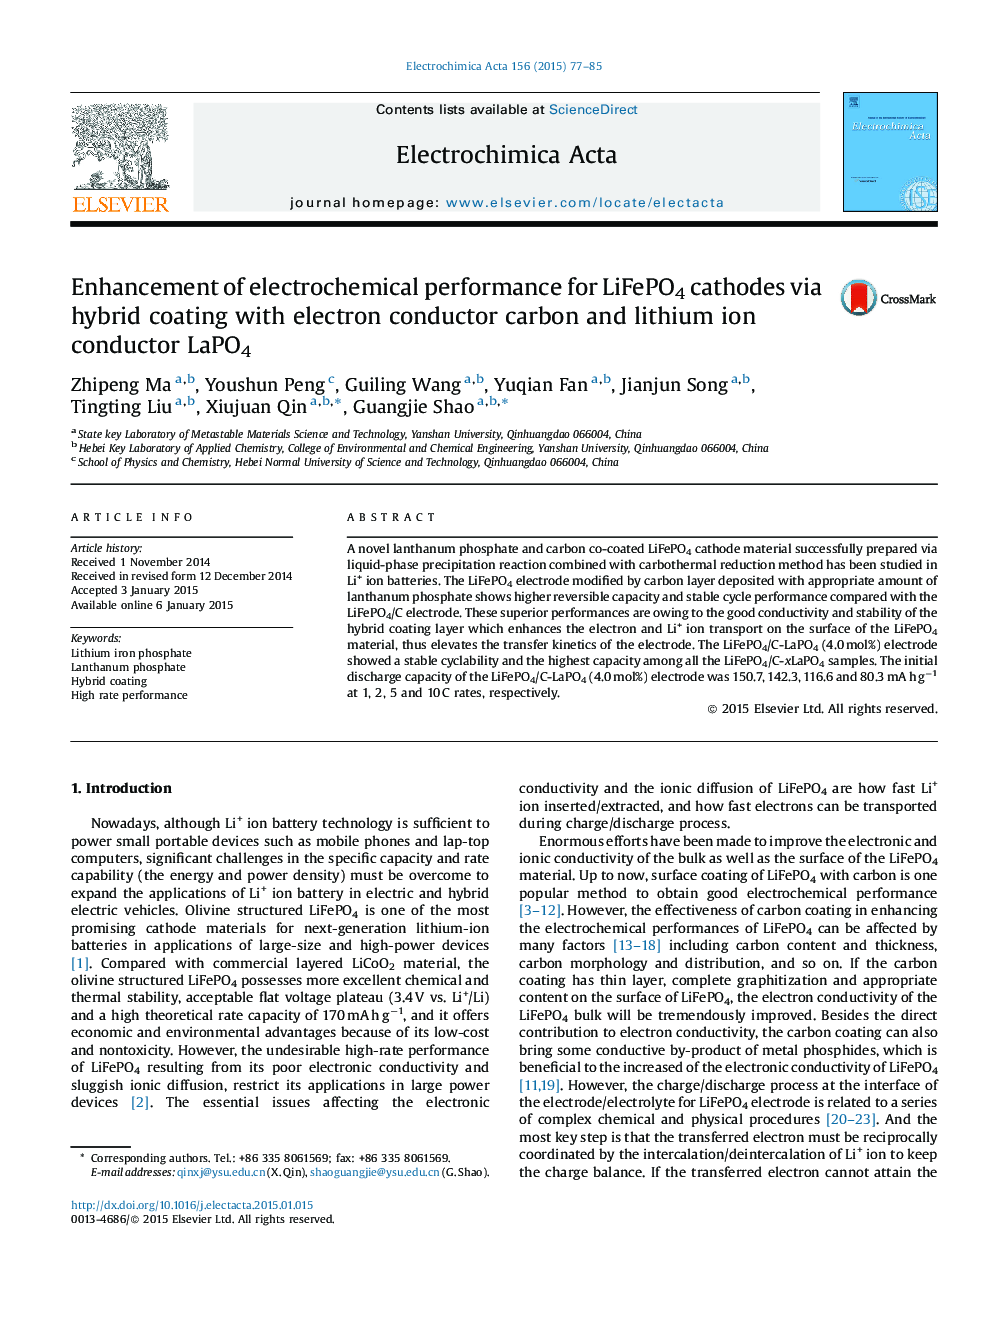 Enhancement of electrochemical performance for LiFePO4 cathodes via hybrid coating with electron conductor carbon and lithium ion conductor LaPO4